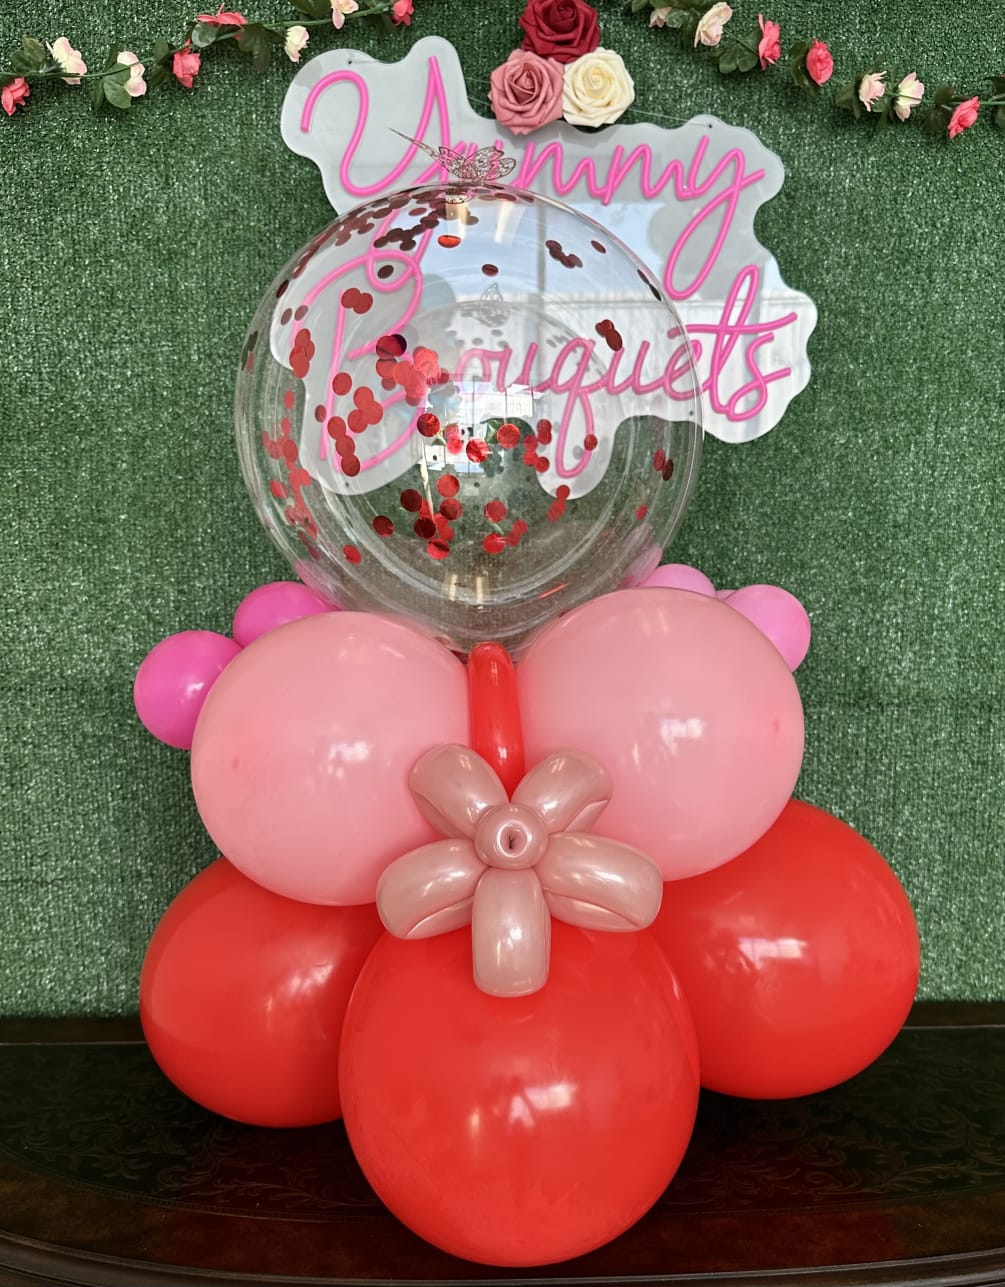 Premium latex air and Bobo balloons
Choose the color and Theme balloons
